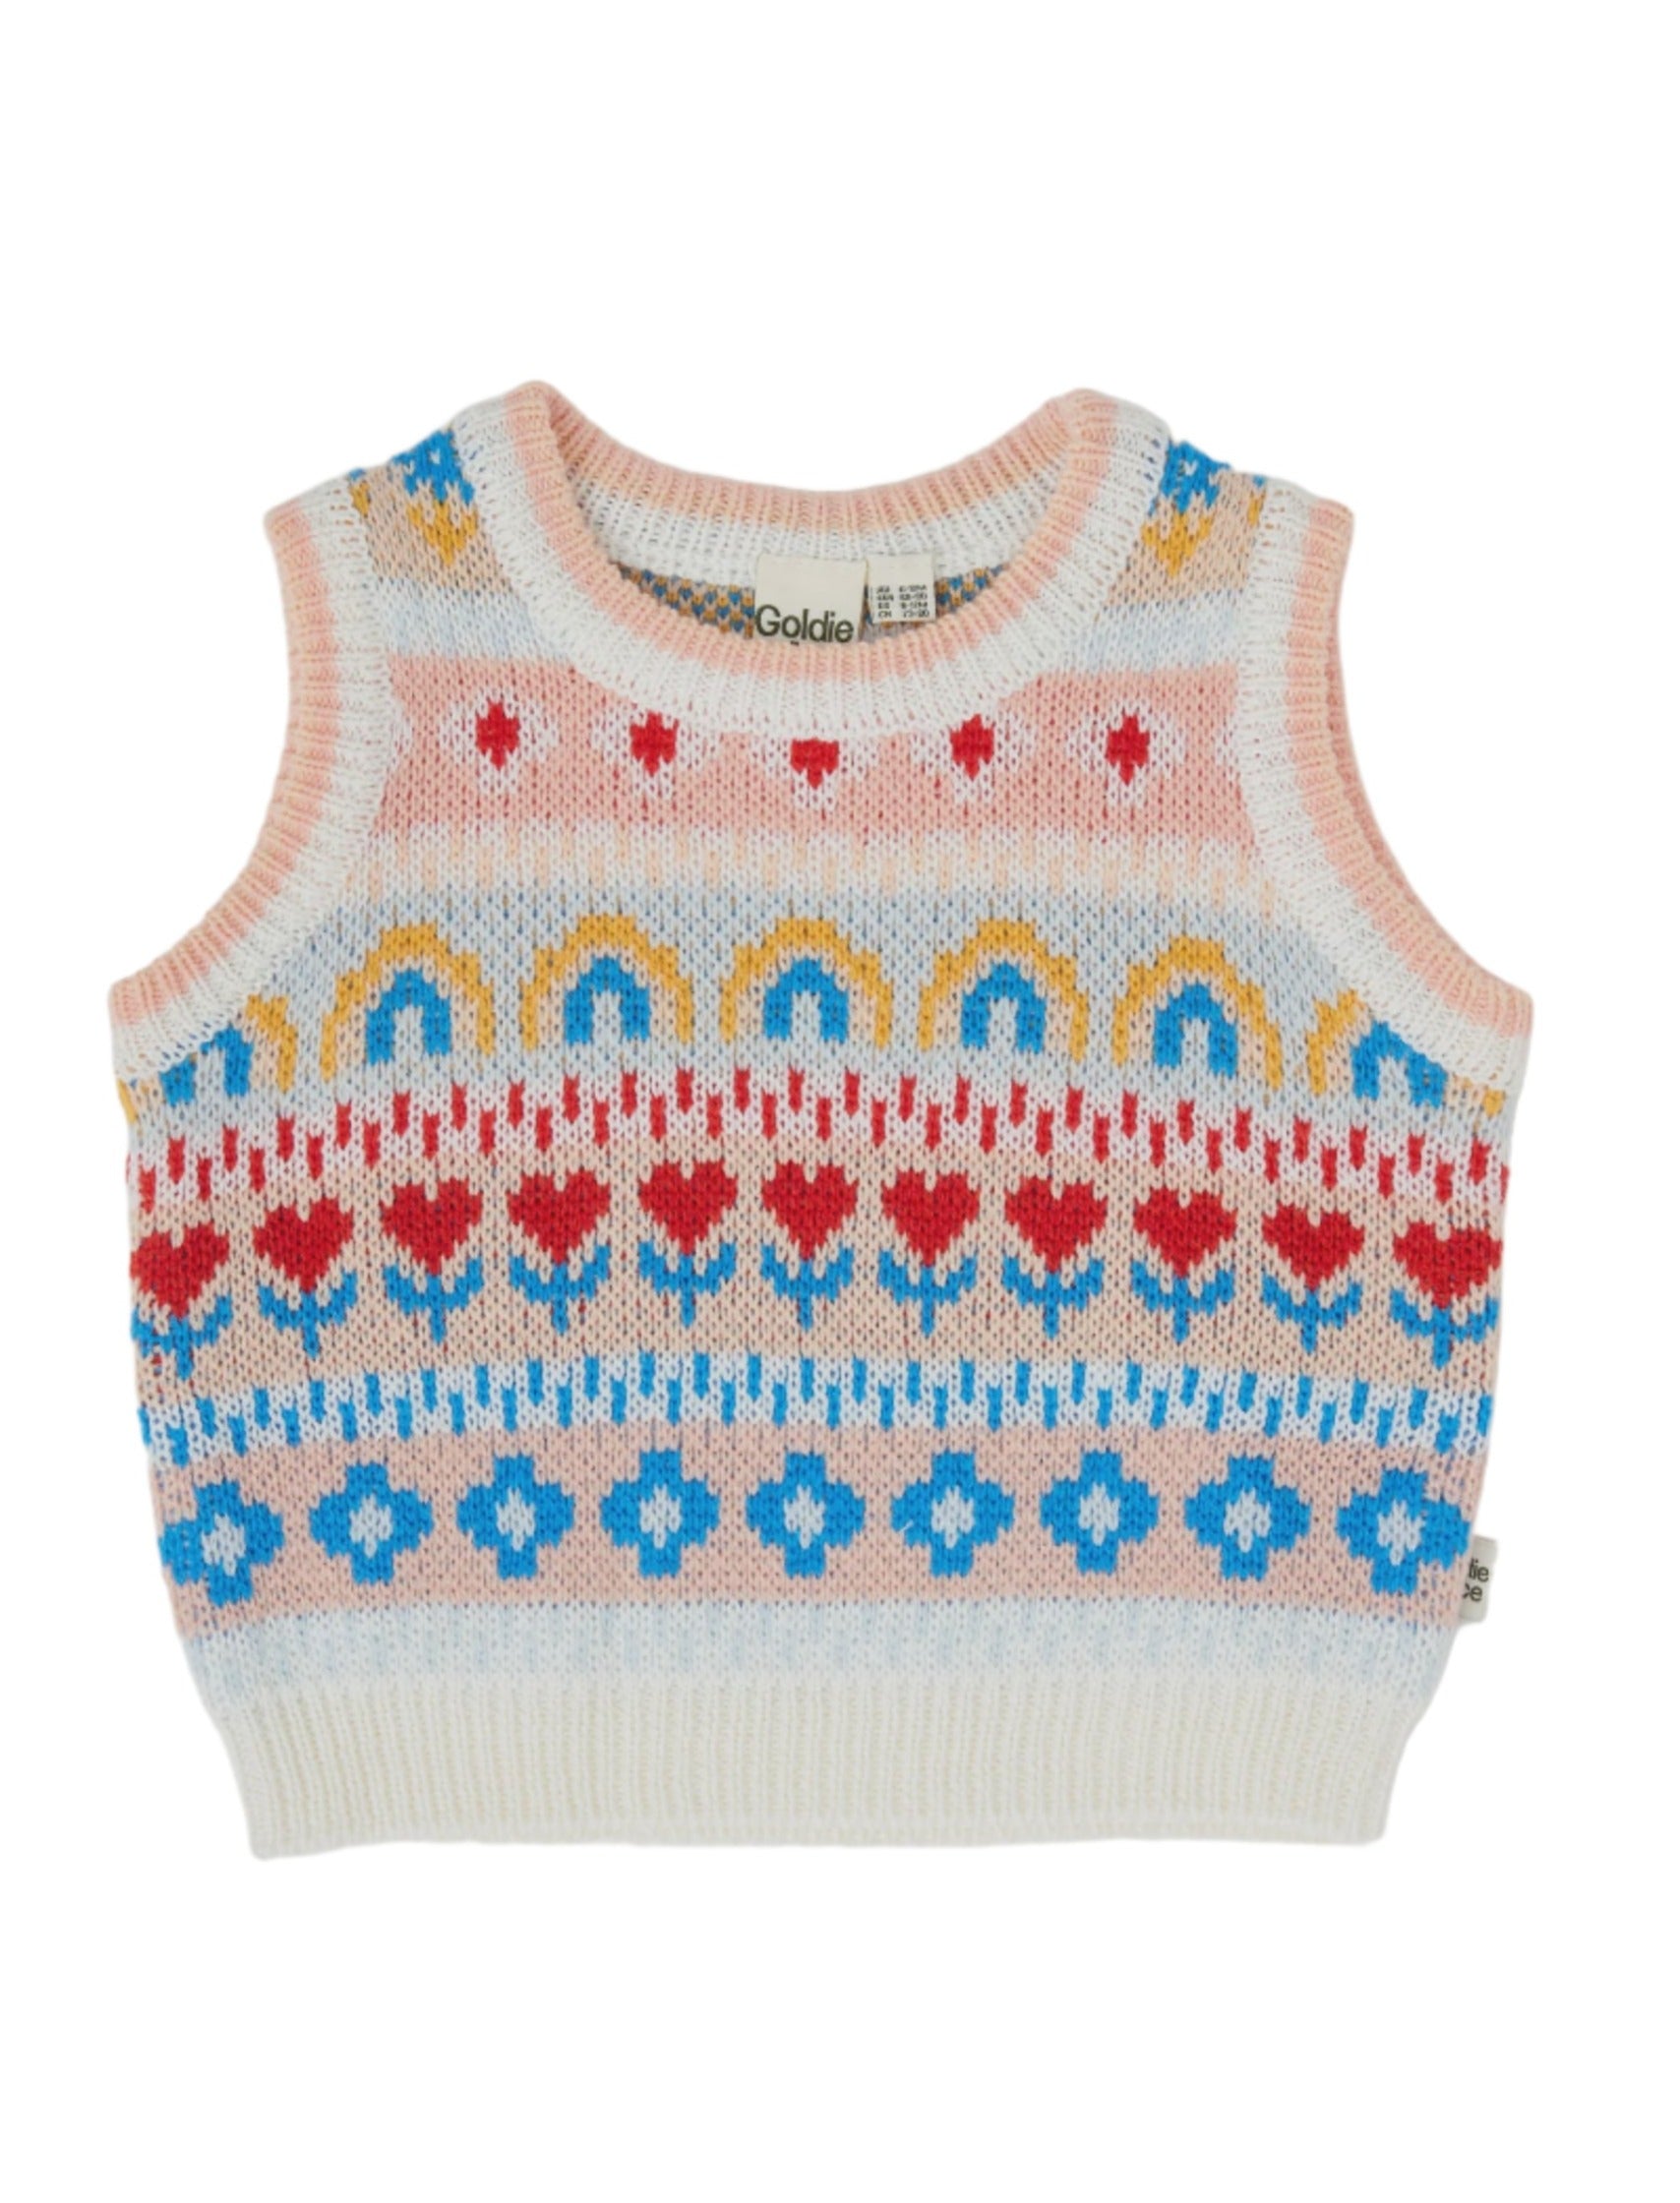 MATILDA SWEATER VEST | Goldie and Ace